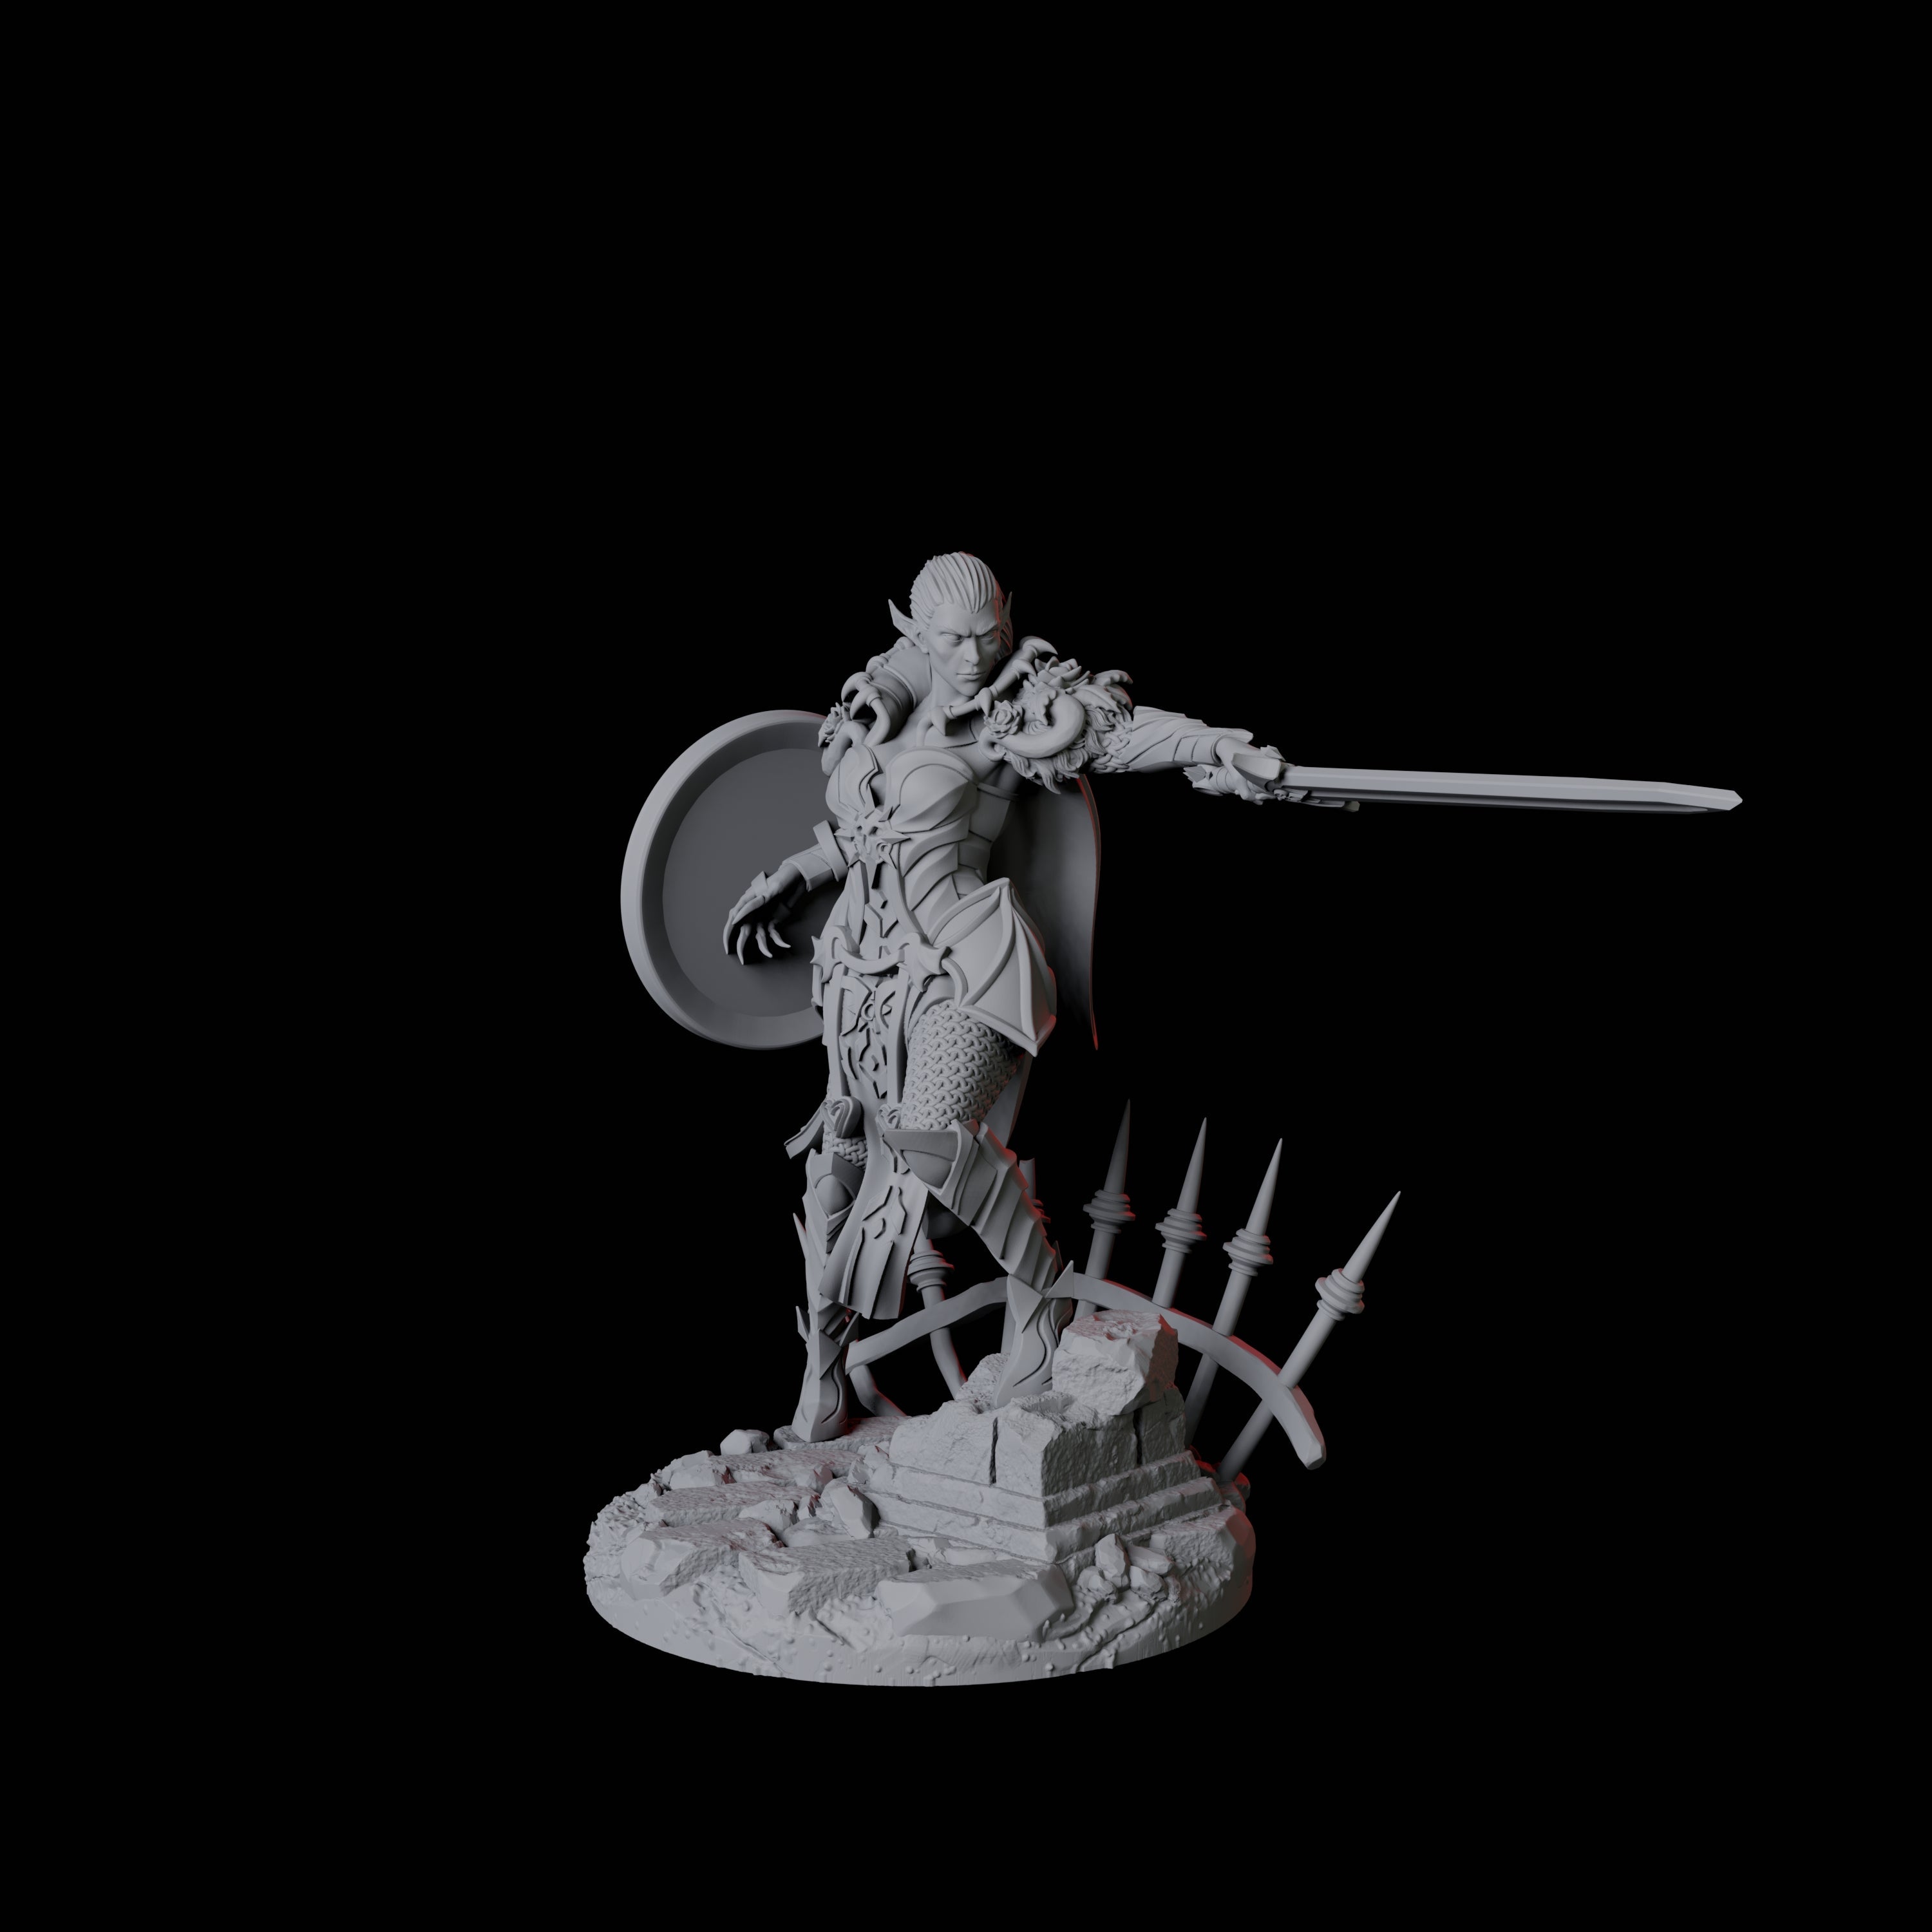 Vampire Warrior A Miniature for Dungeons and Dragons, Pathfinder or other TTRPGs